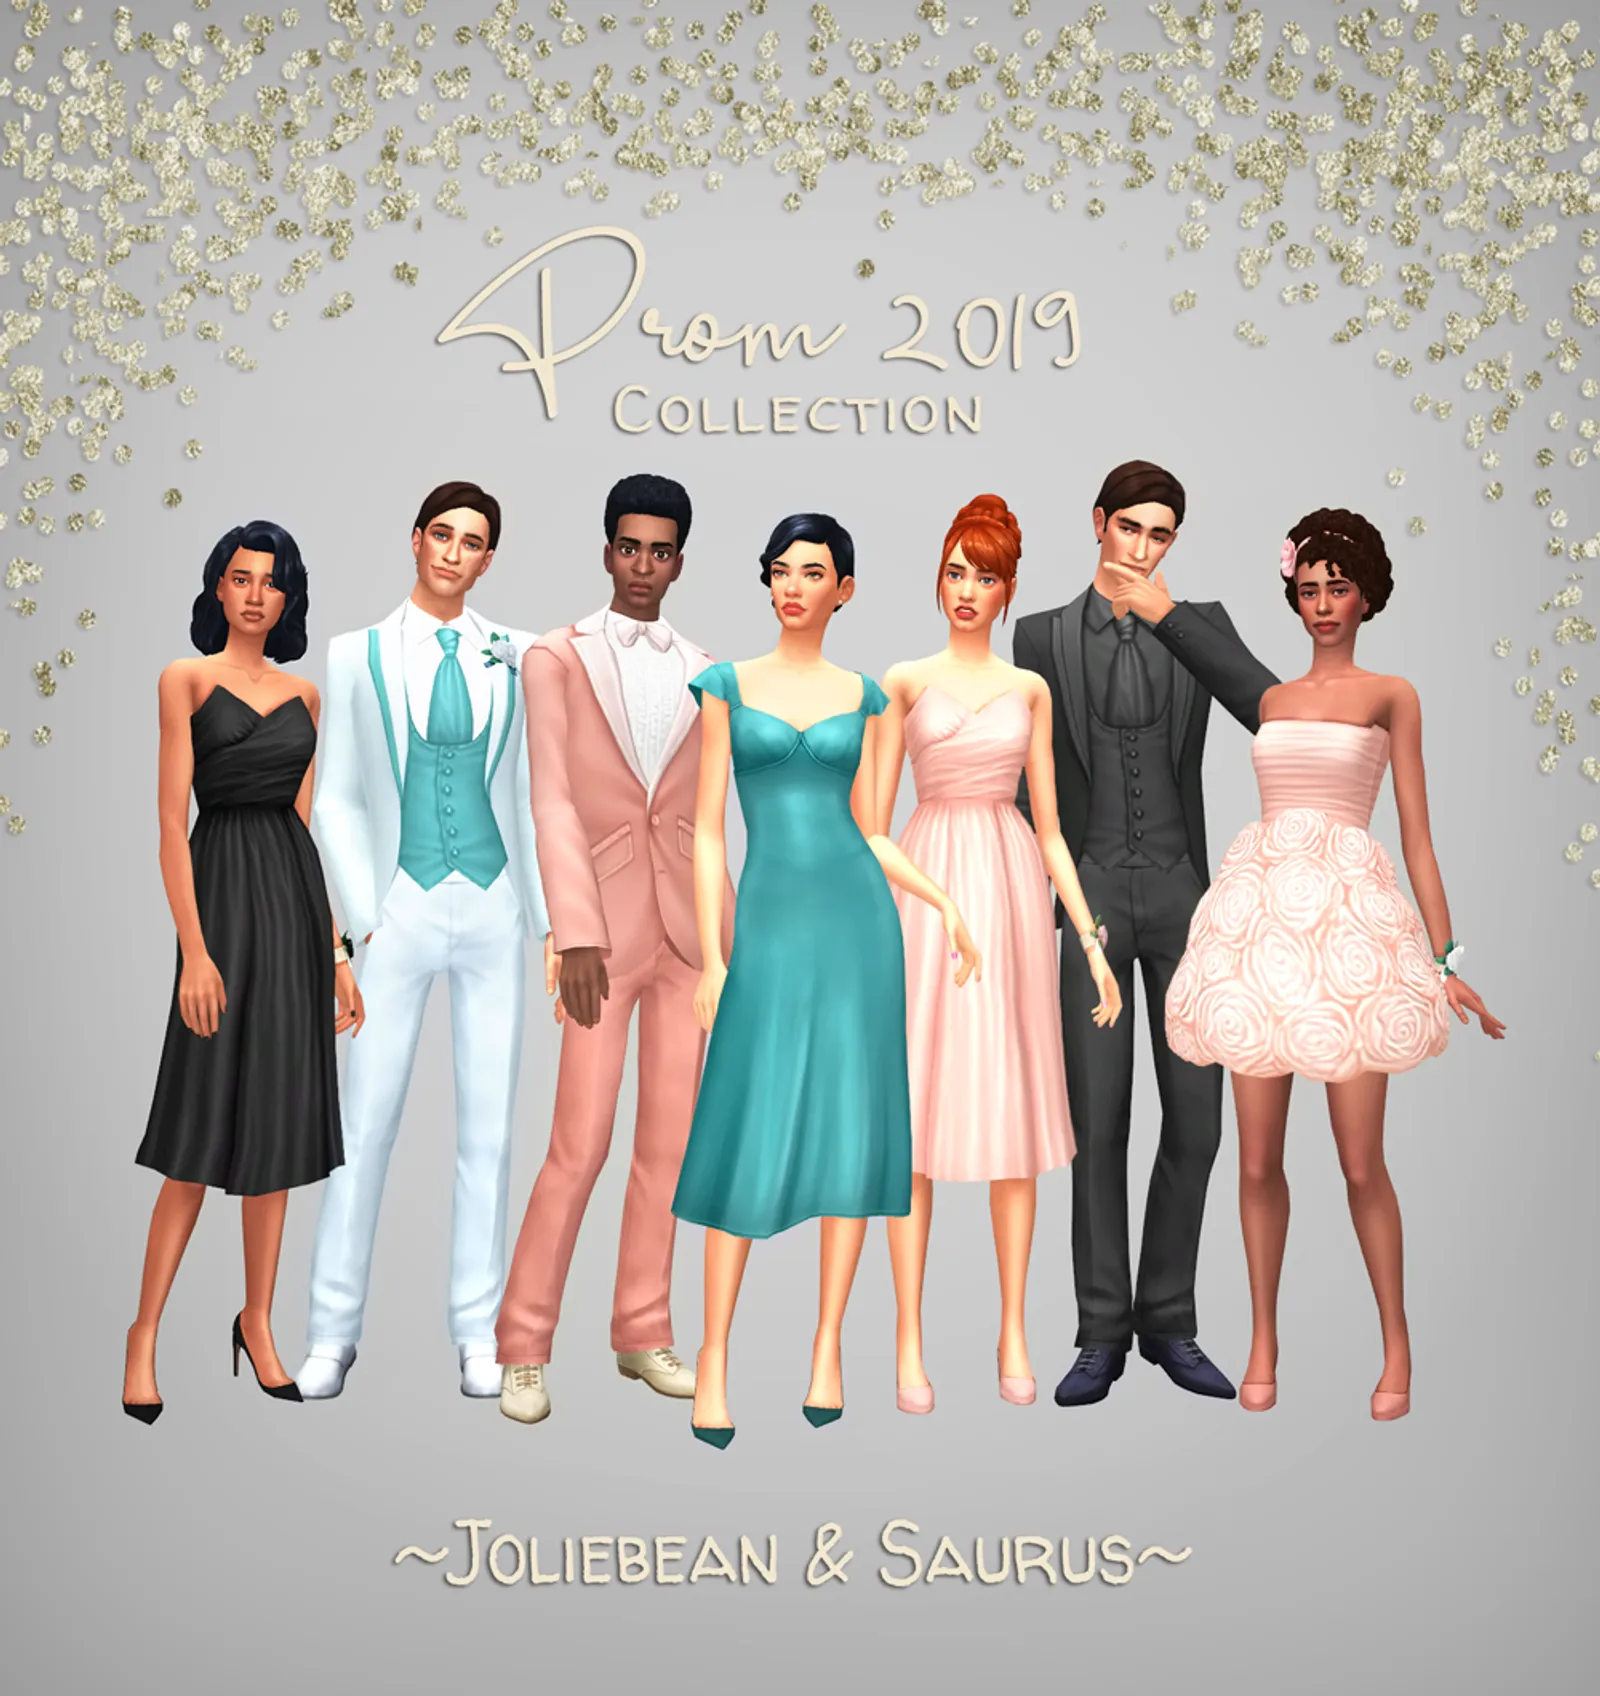 Prom 2019 Collection by Saurus & Joliebean (Updated!!)